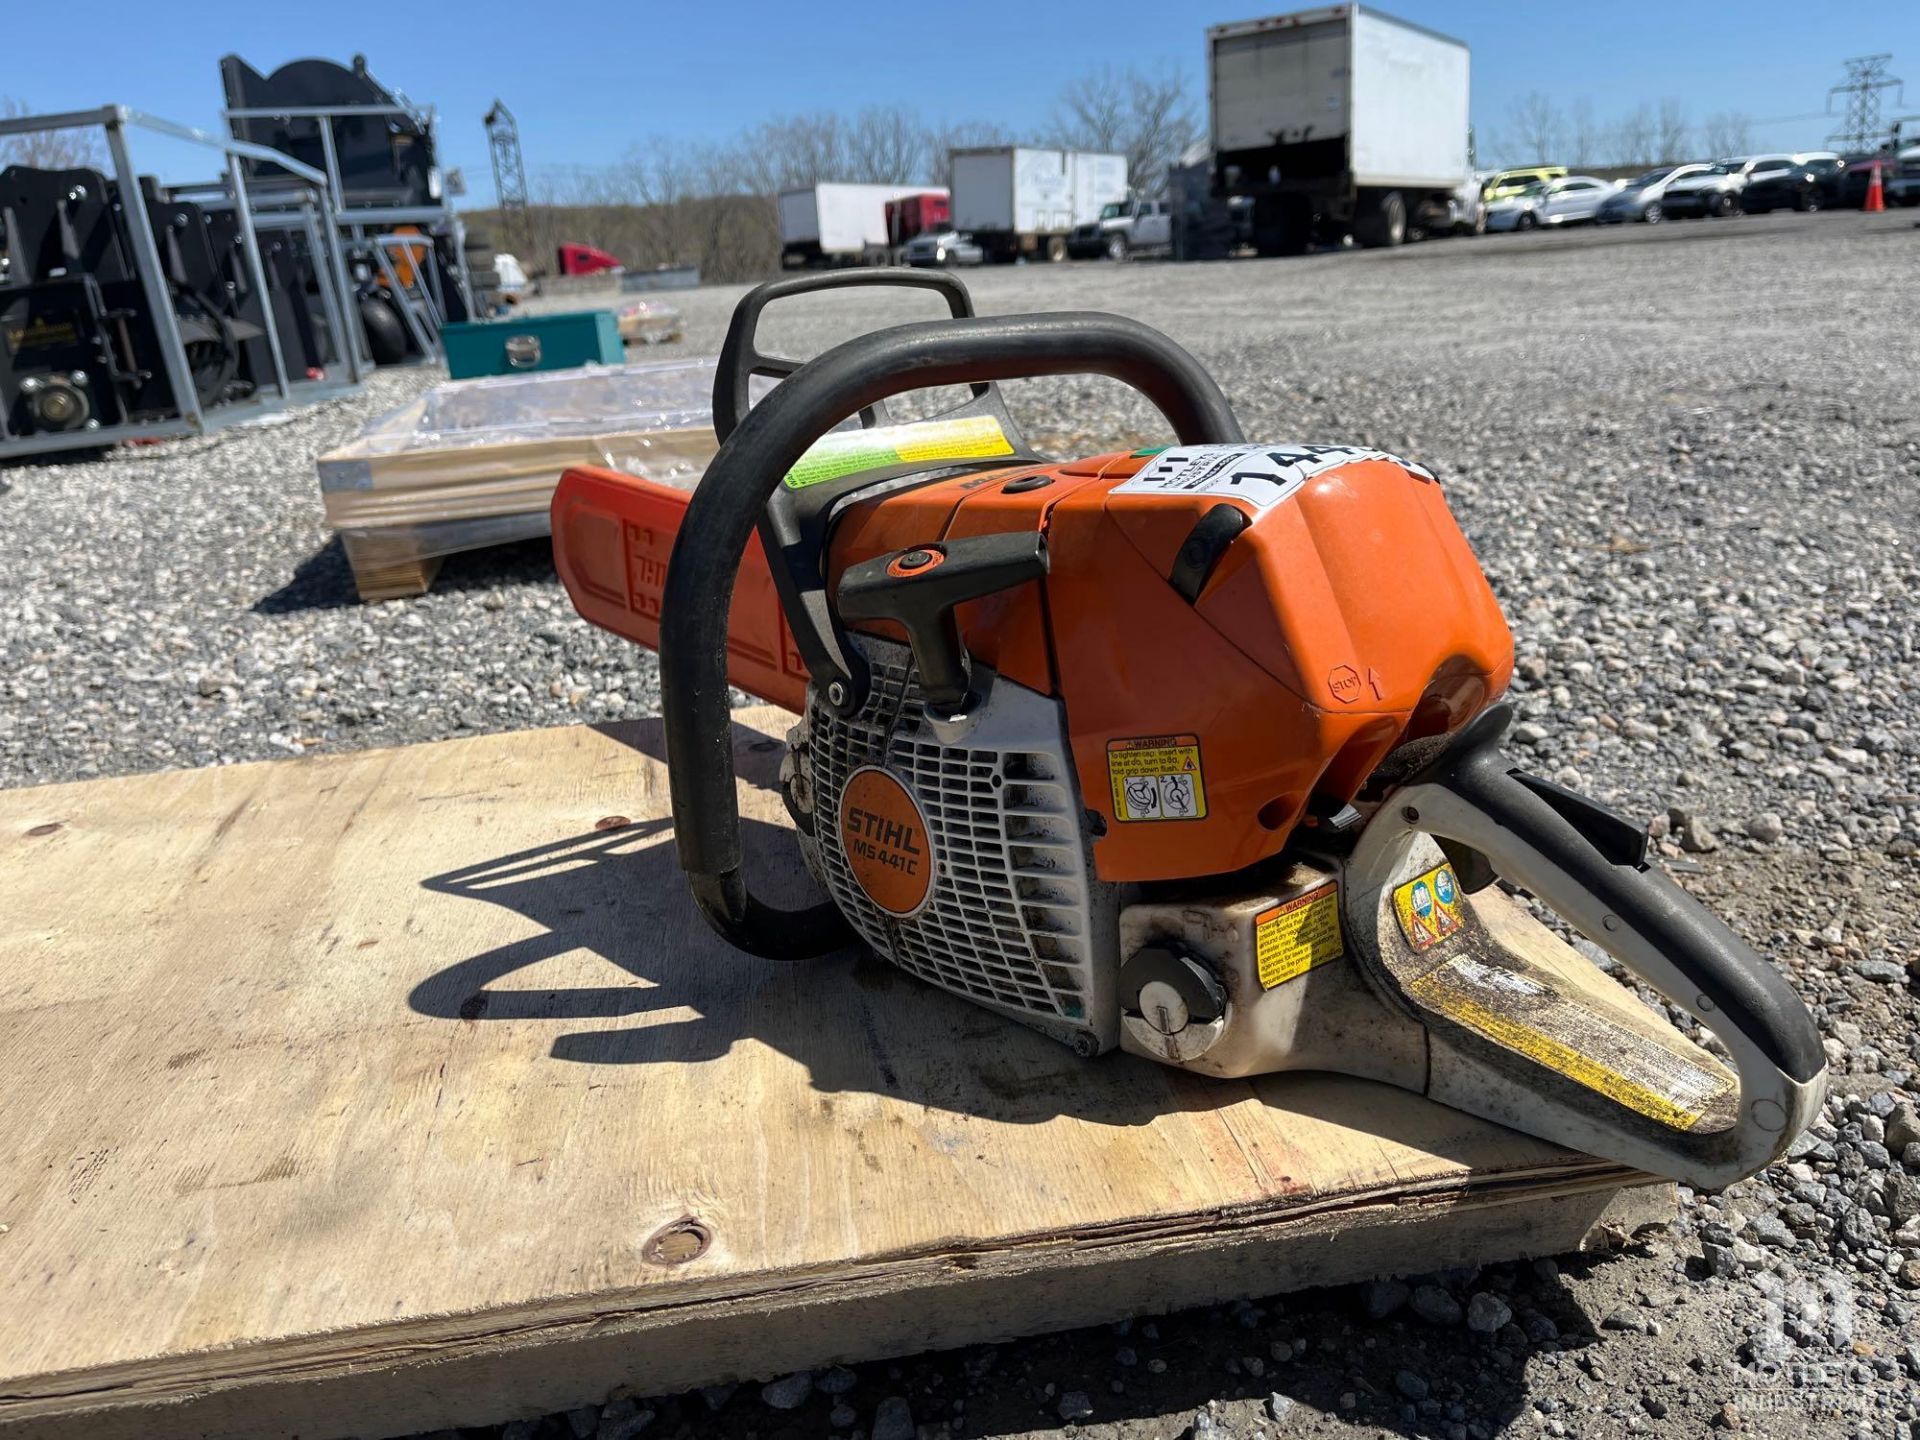 2013 Sthil MS441 Chainsaw - Image 4 of 6